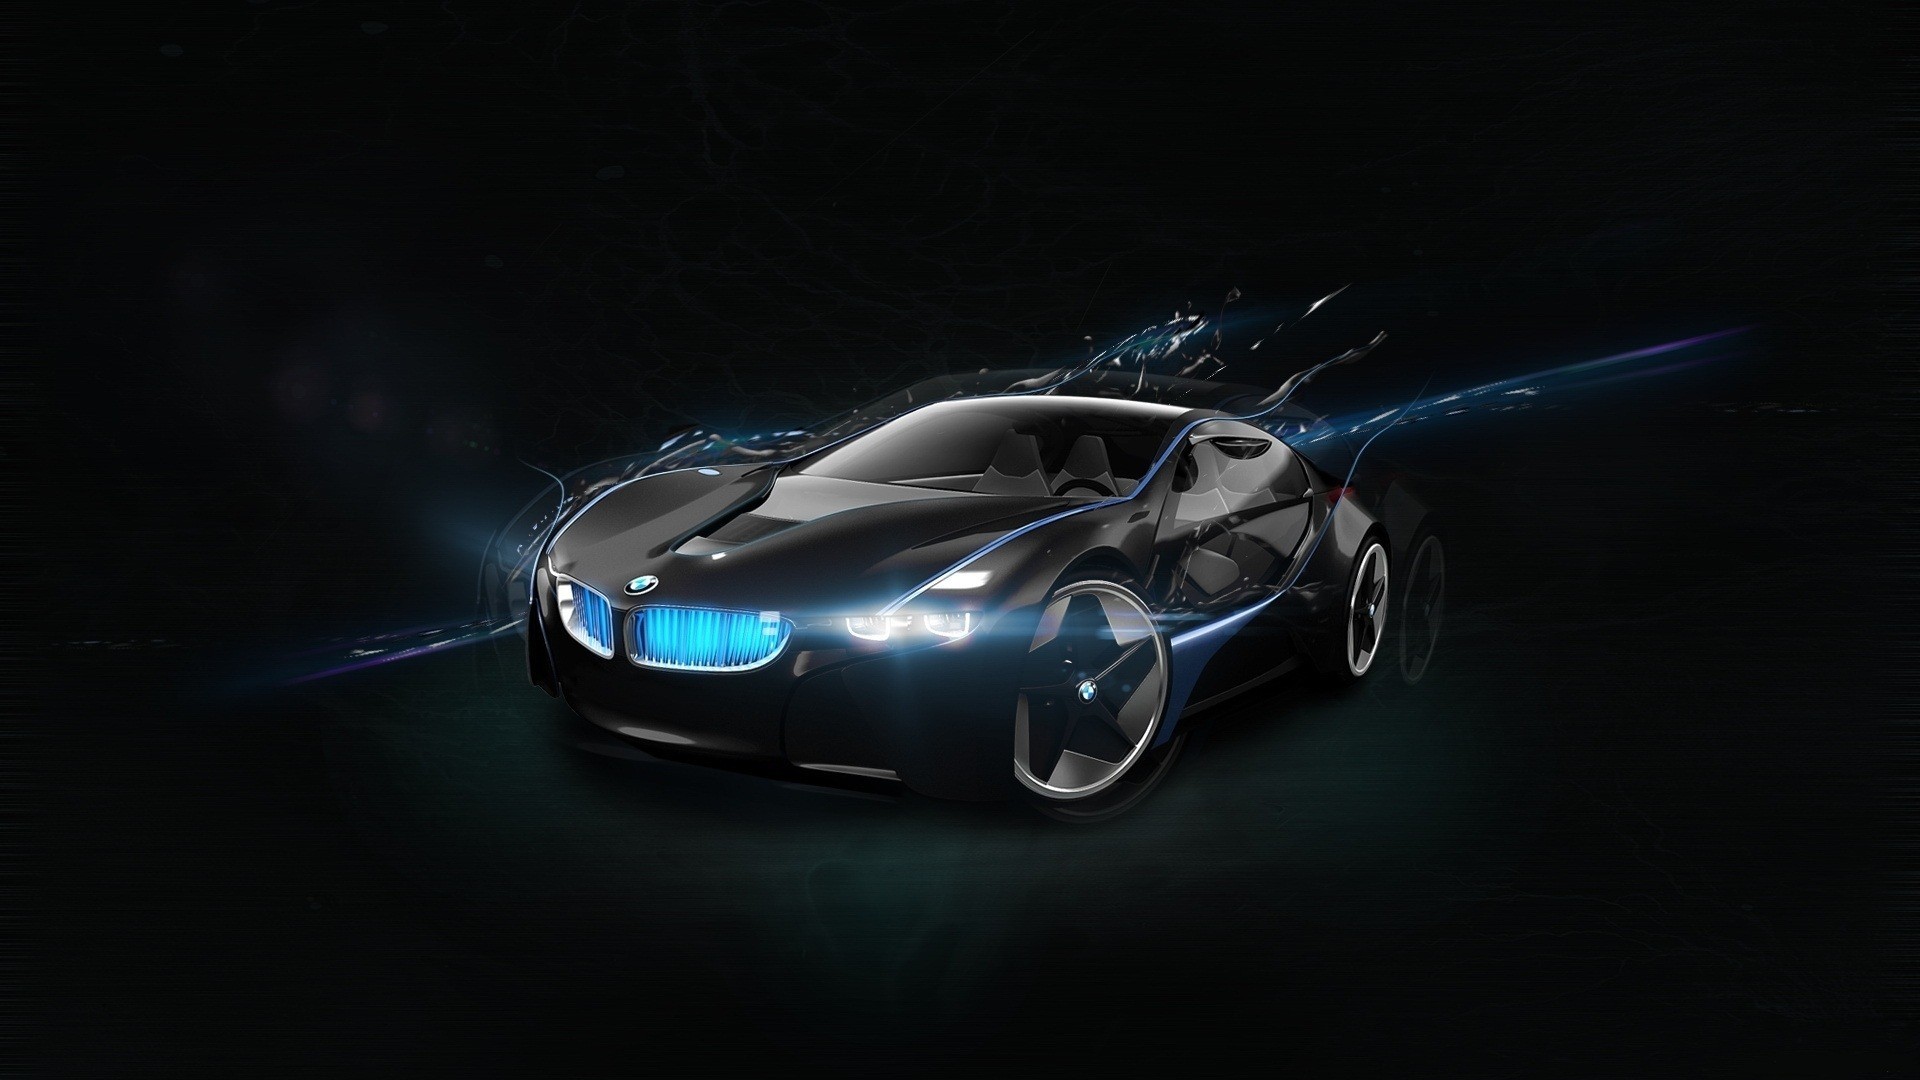 Wallpapers Concept Cars Bmw Bmw Vision on the desktop